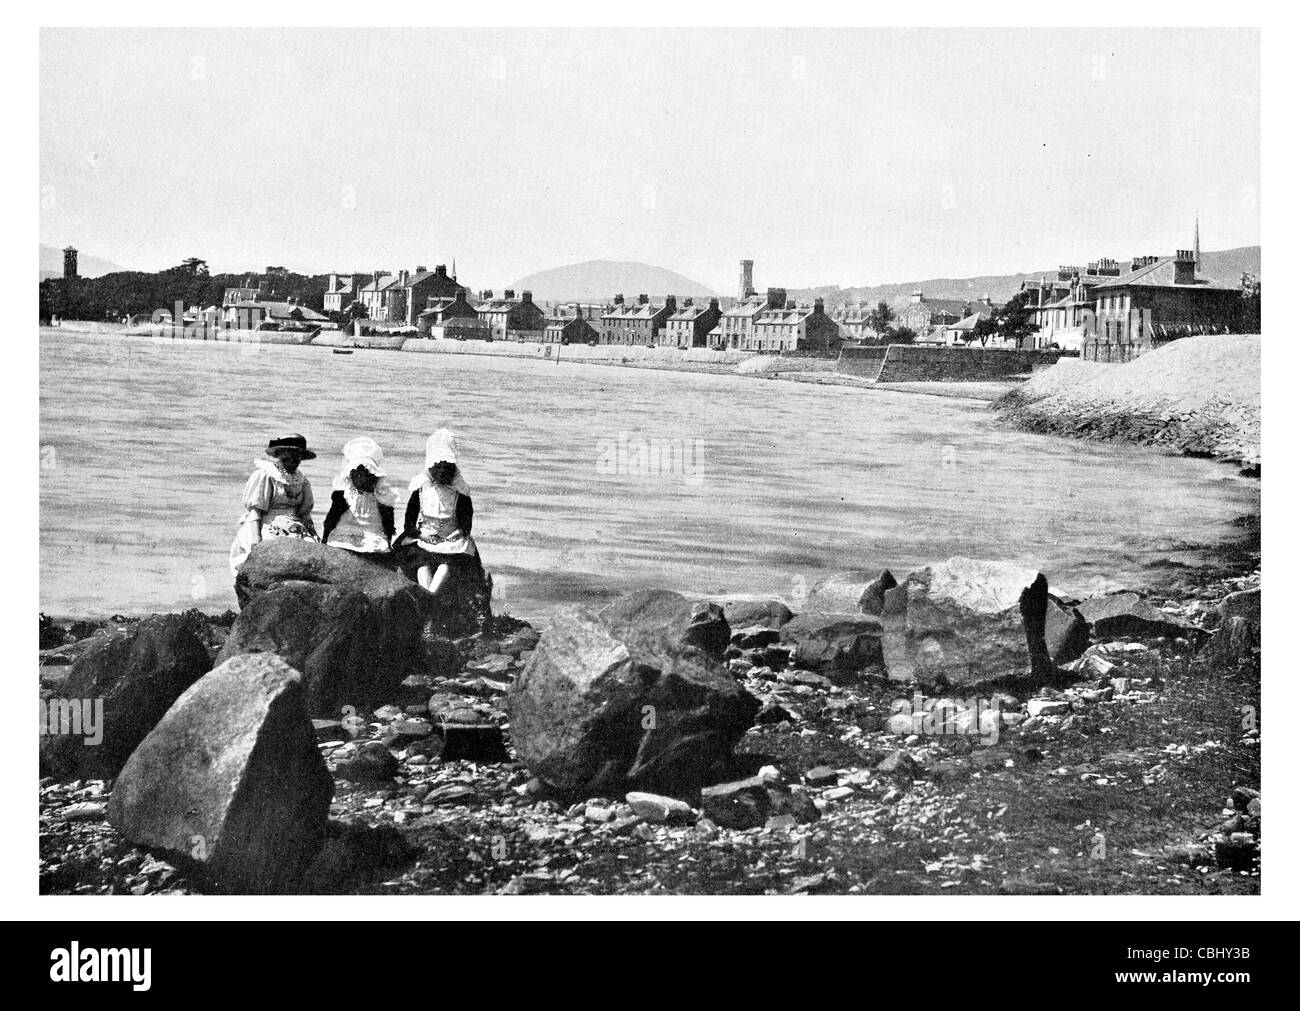 Orient Bay Helensburgh Argyll Bute Ecosse Firth of Clyde shore Gareloch enfants costume filles girl beach bay Banque D'Images